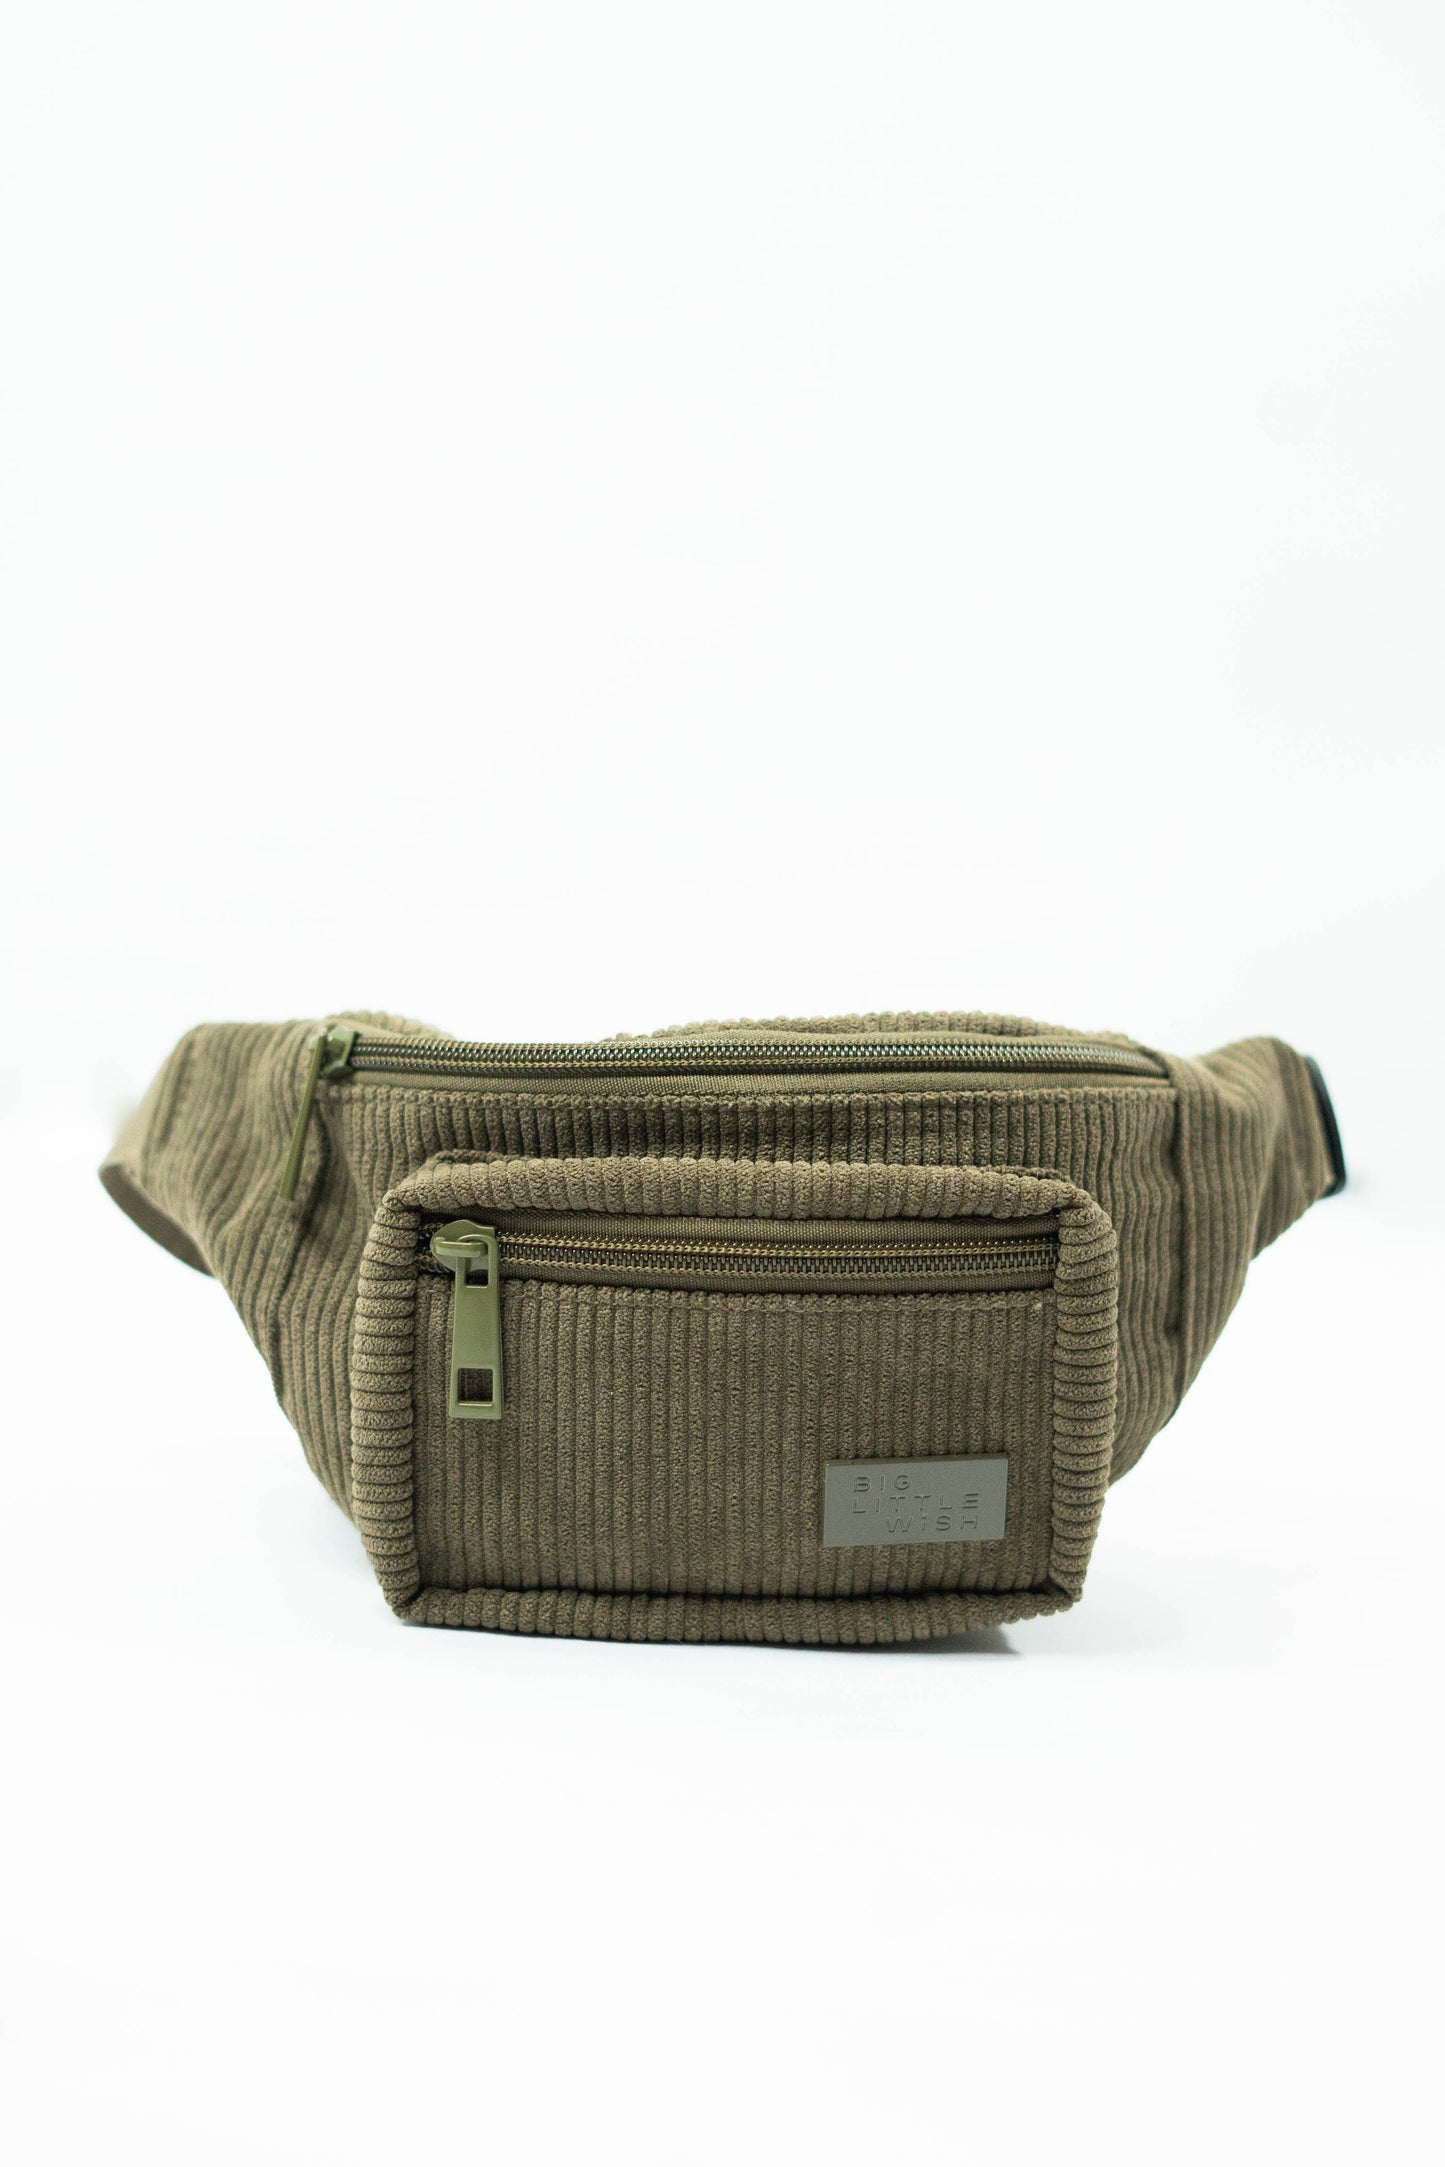 The Play Date Bag- Olive Green